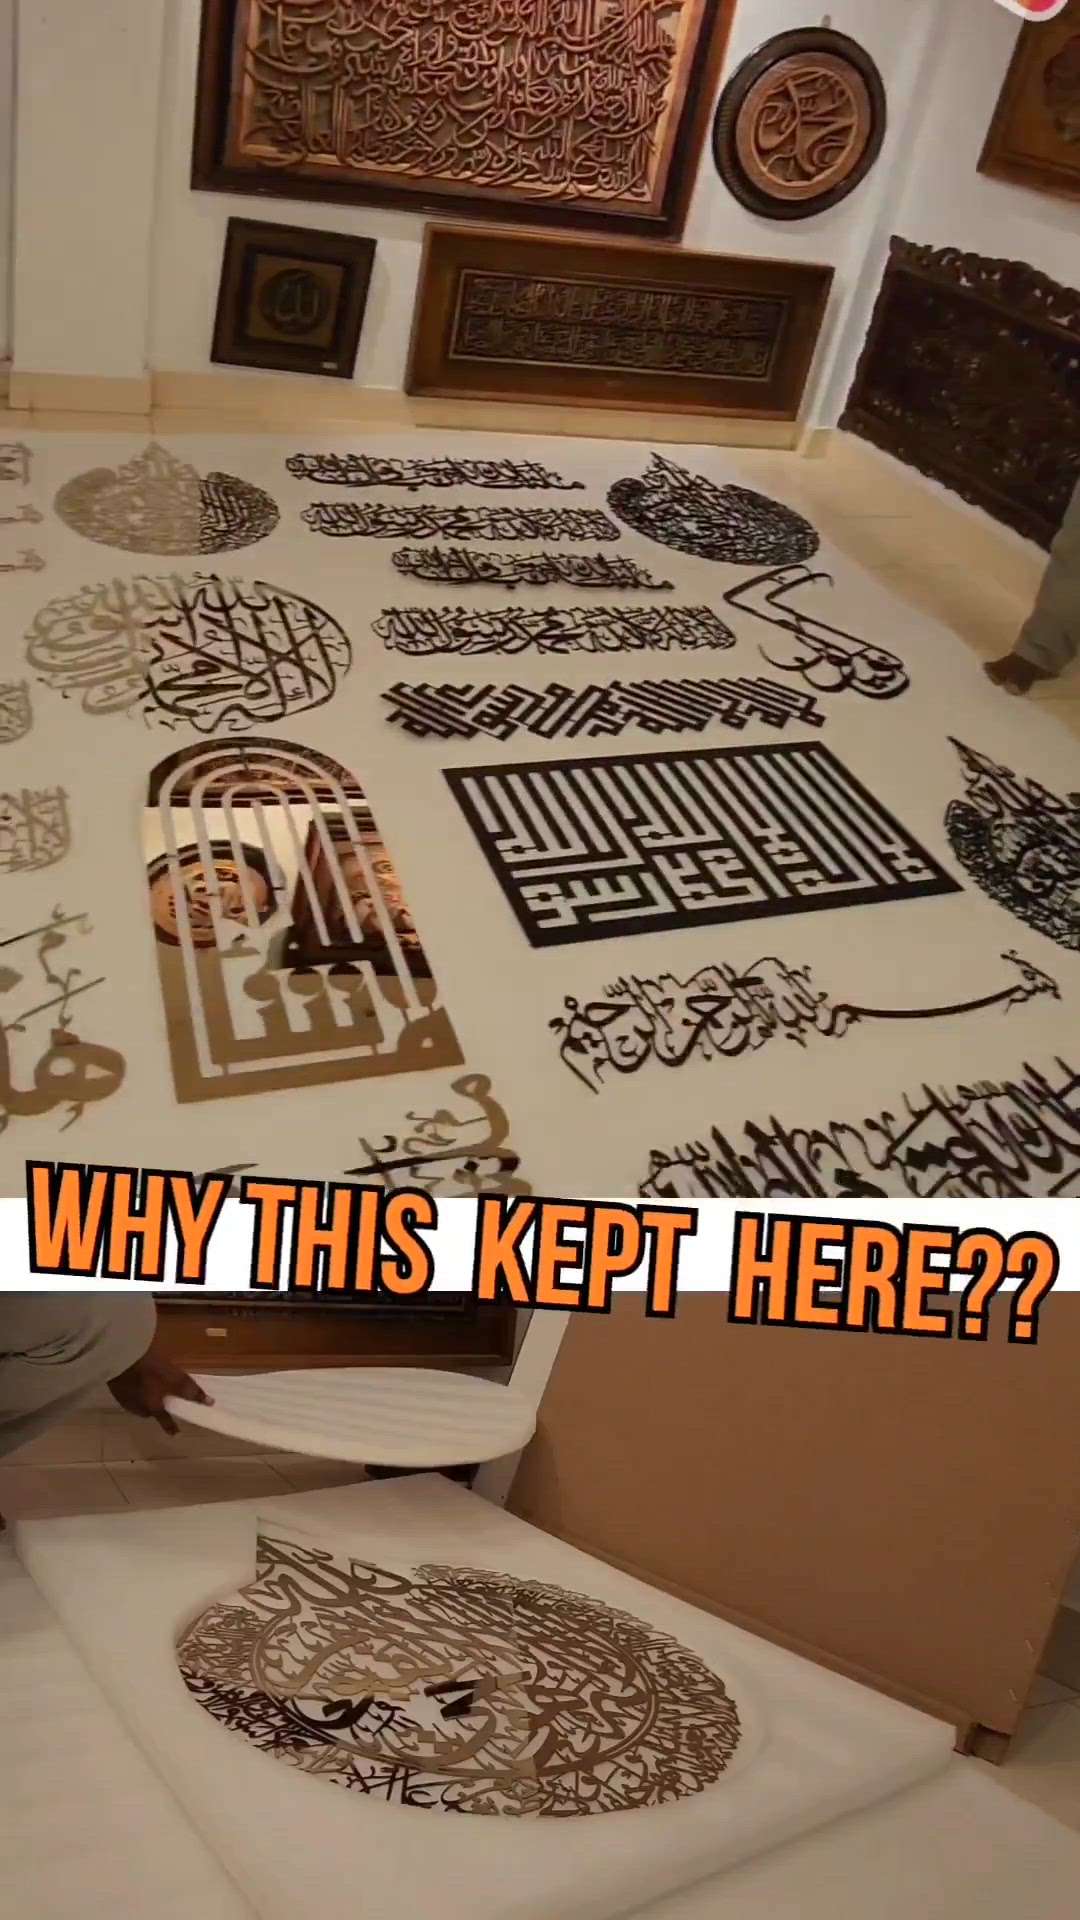 Dm for pricelist.
Whatsapp me on 9633023287

We have all India Delivery 
We are in kochi kakkanad
We have over 400 designs in wood and metal
Delivery free in kerala
We suggest designs and sometimes help you to install 
Yes its easy to hang

Save it for future 👇 Arabic calligraphy + large collection of designs + any size + colour + discounted pricing + delivery = Coversun. 

It is a must wall decor piece to every Muslim homes. It’s elegant, beautifully and it reminds us of Allah and his quran

Metal arts are so high in demand but the process of making it makes it less in supply. But now things changed. An young entrepreneur named rashad is doing whatever it takes to bring maximum collection on metal and wood wall arts and calligraphy. 

We are also joined his journey to support calligraphy lovers and artists along with reducing the gap of supply and demand. 

#caligraphy #metalwallart #arabiccalligraphy #WallDecors